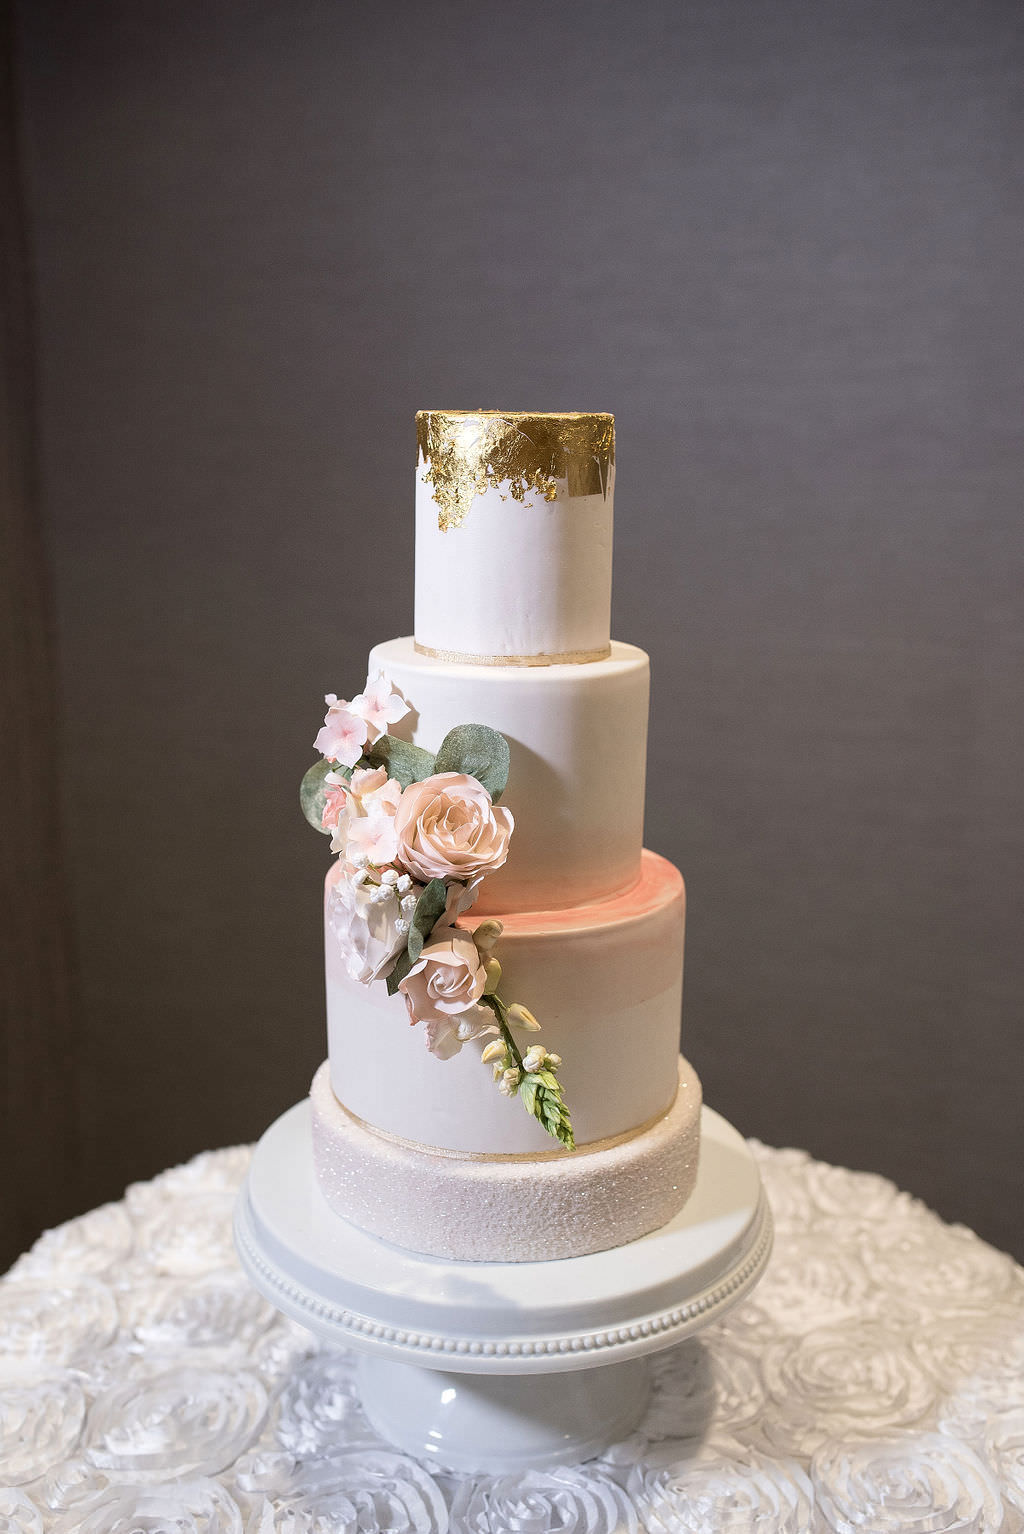 Classic Elegant Four Tier White with Gold Foil Top Tier and Roses Wedding Cake | Tampa Bay Wedding Photographer Kristen Marie Photography | St. Pete Wedding Bakery The Artist Whisk